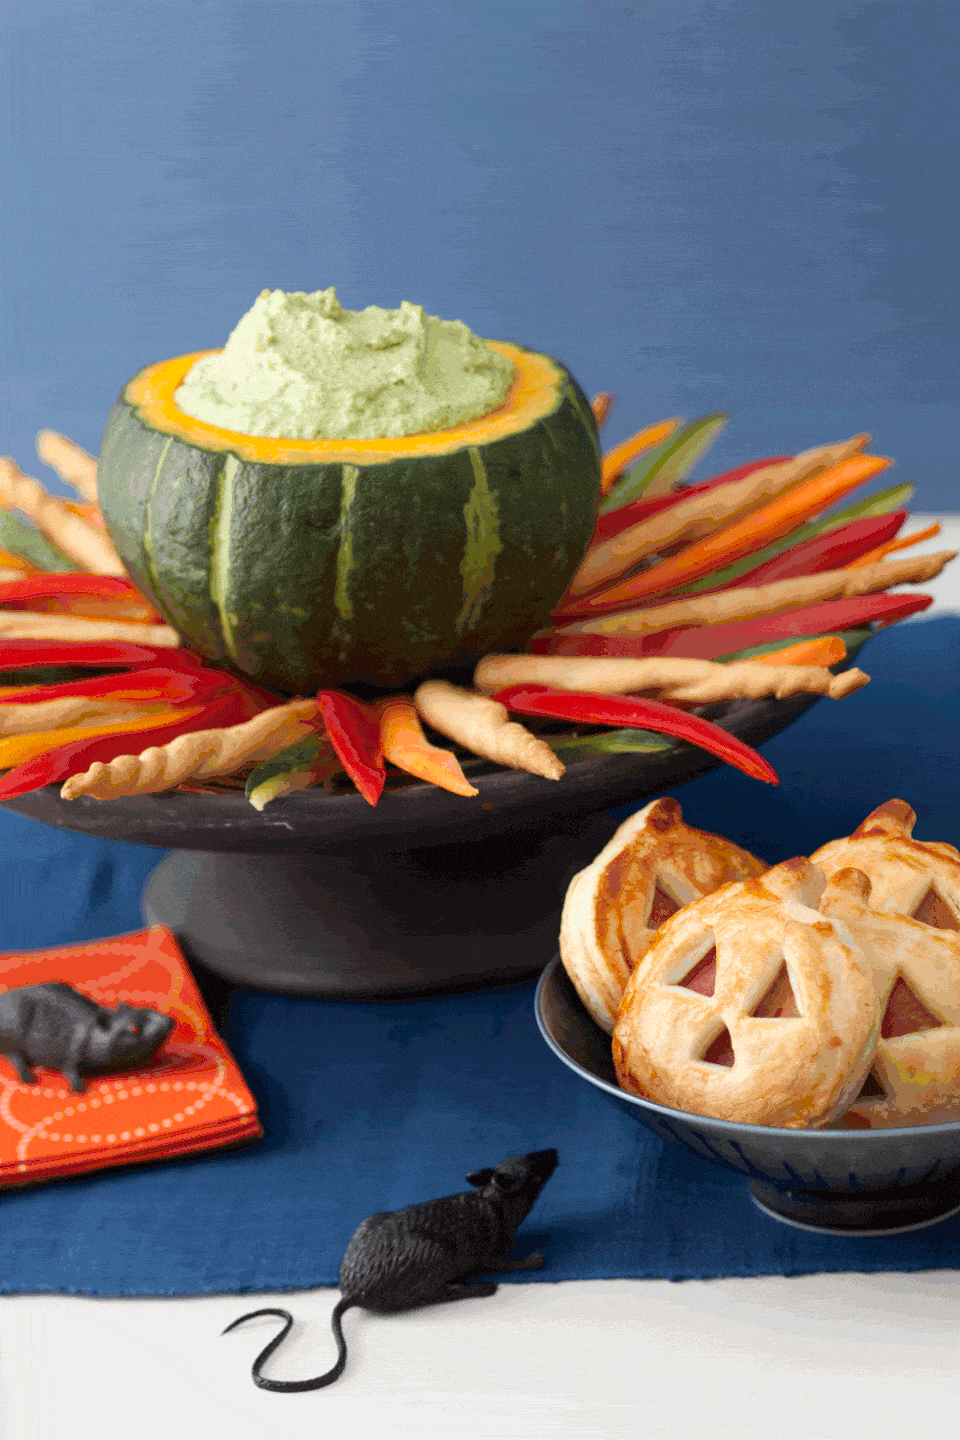 <p>Made from edamame and low-fat ricotta cheese, this tasty green dip looks even cooler when served in a hollowed-out acorn squash and surrounded by a "fire" of crudité and breadsticks.</p><p>Get the <strong><a href="https://www.womansday.com/food-recipes/food-drinks/recipes/a11350/cauldron-dip-recipe-122710/" rel="nofollow noopener" target="_blank" data-ylk="slk:Cauldron Dip recipe" class="link ">Cauldron Dip recipe</a></strong>.</p>